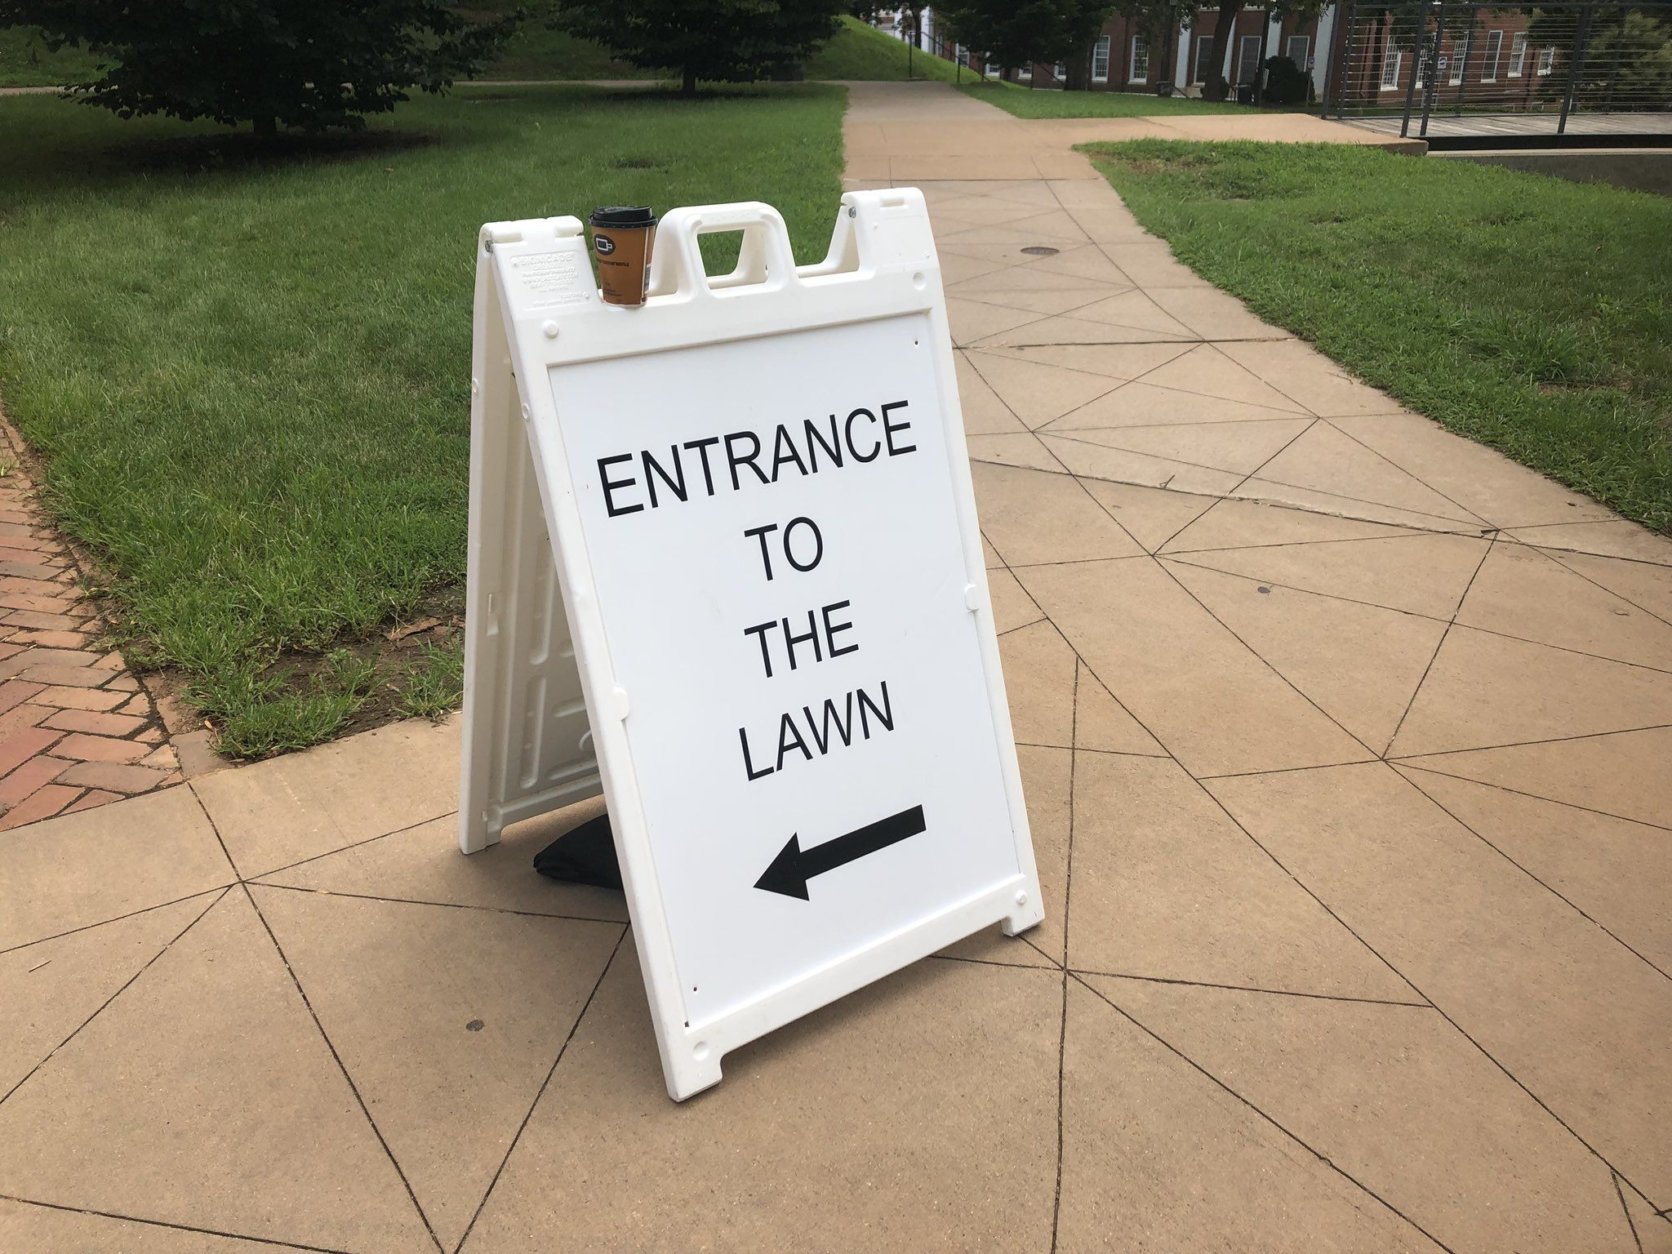 Entrance to the Lawn at the University of Virginia is limited to residents and those who have tickets to the Saturday morning event, "The Hope that Summons Us," in Old Cabell Hall Auditorium. (WTOP/Max Smith)